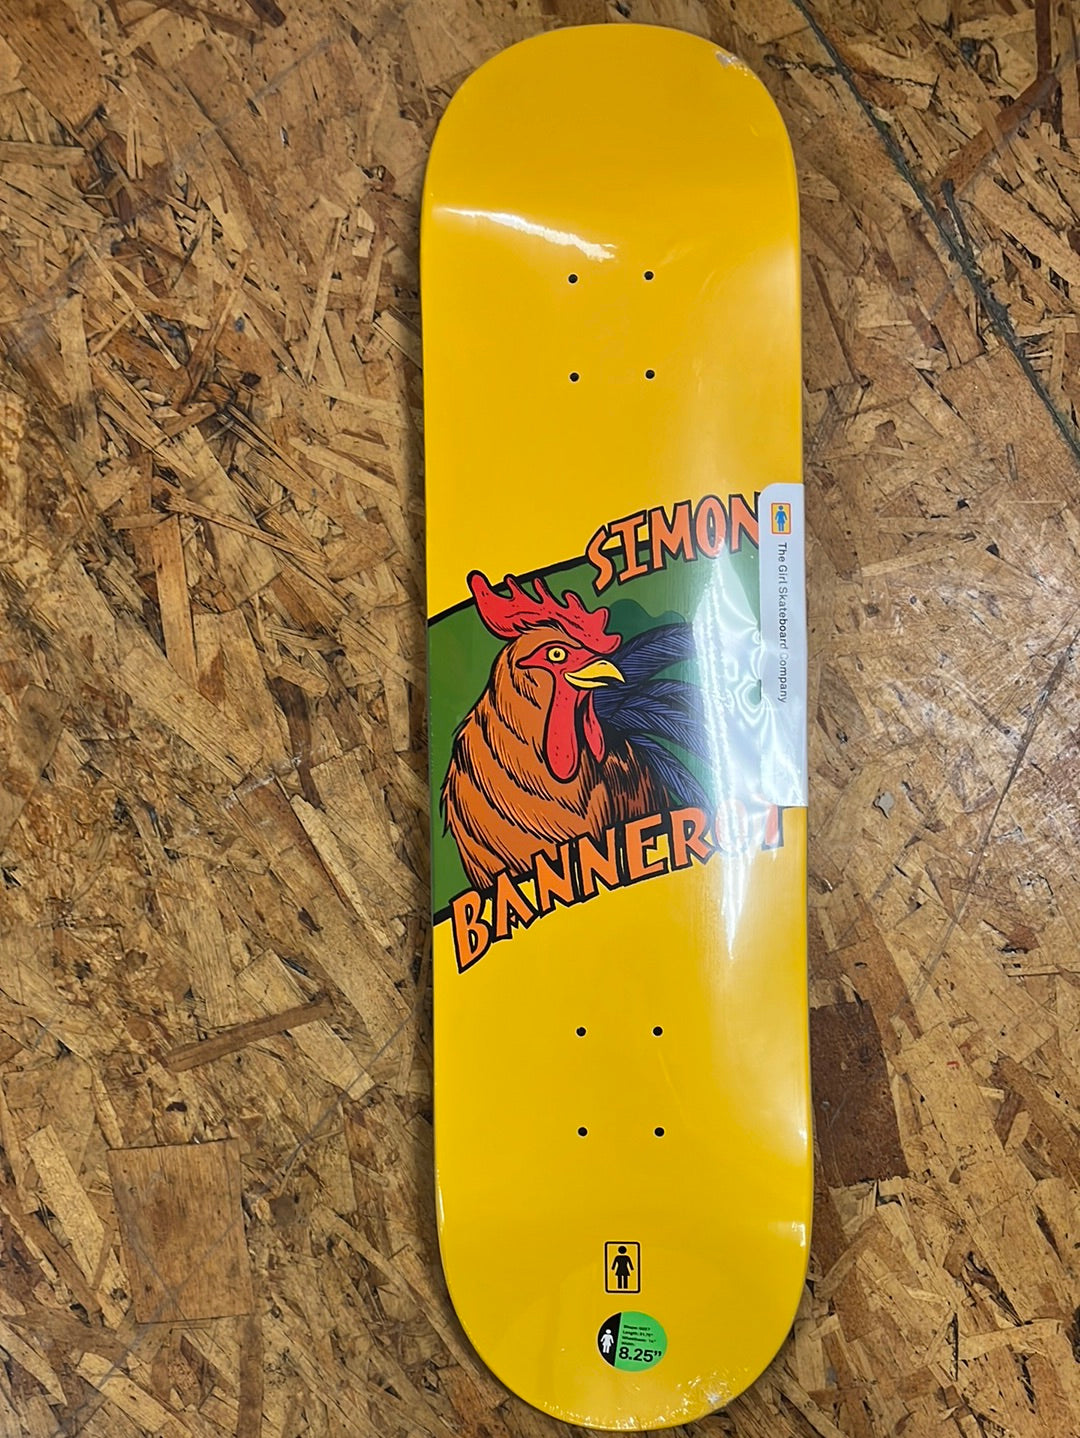 GIRL BANNEROT ROOSTER DECK 8.25